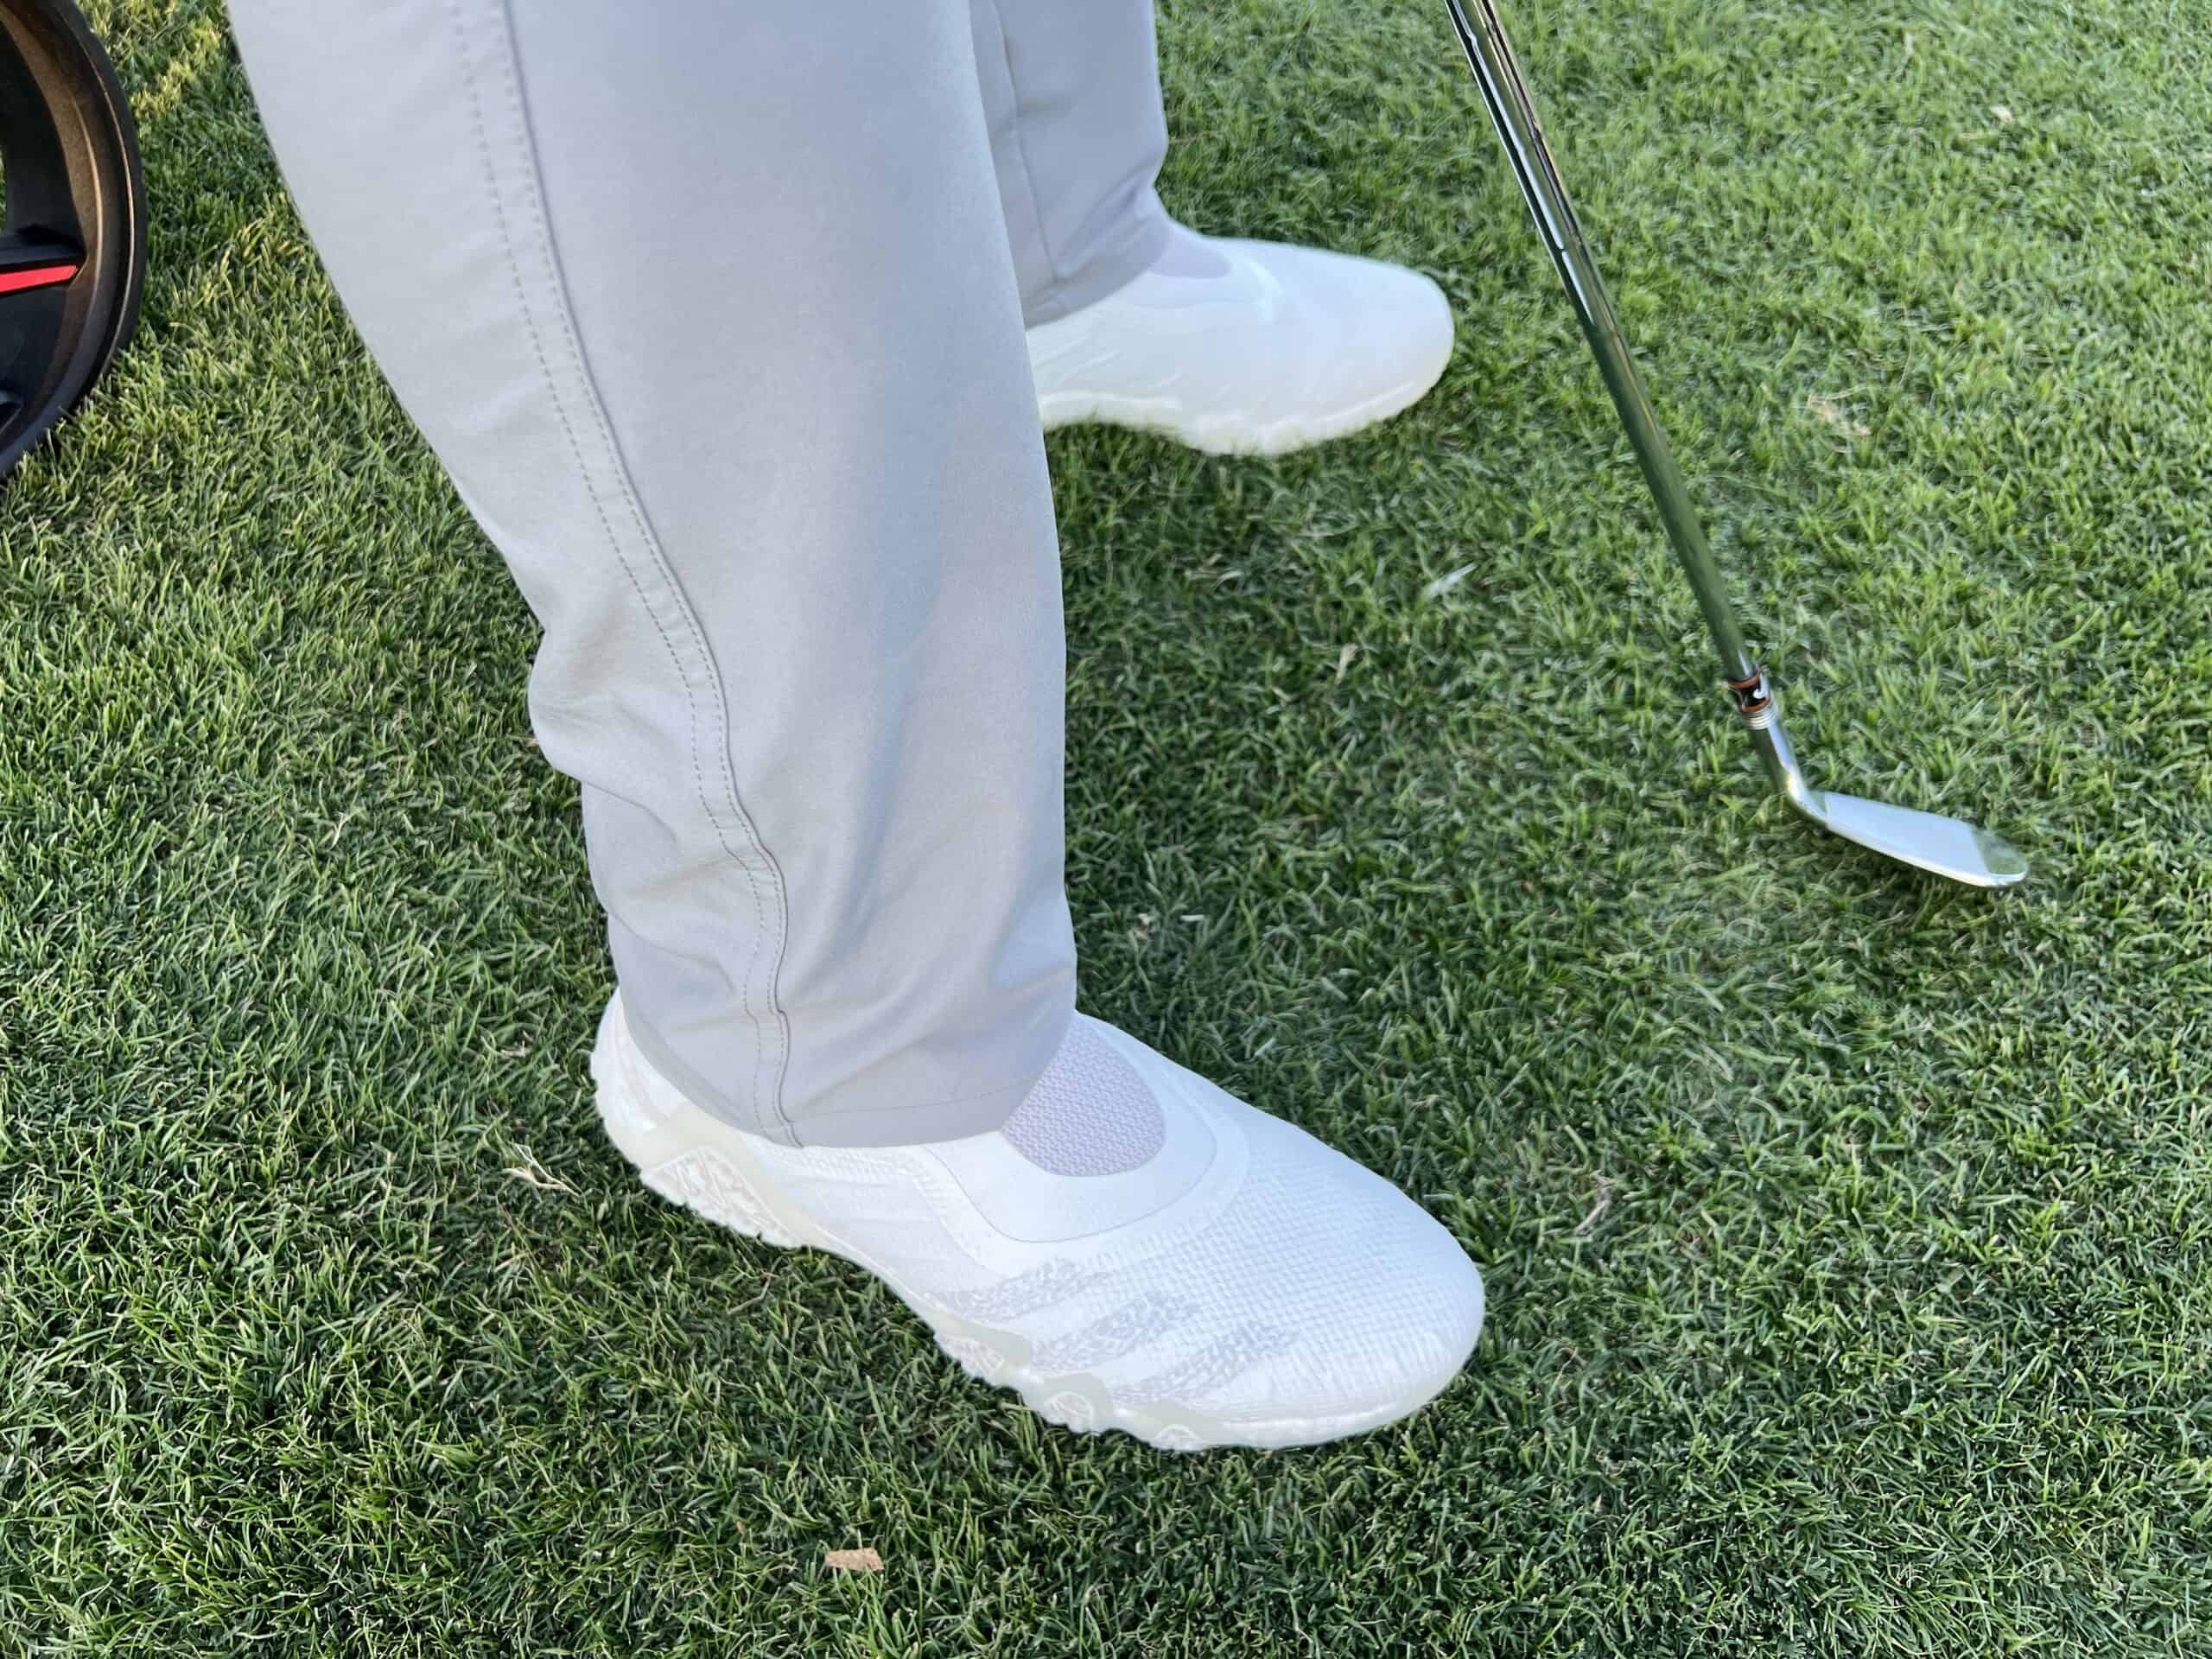 Adidas CODECHAOS Laceless Golf Shoes Review - Independent Golf Reviews